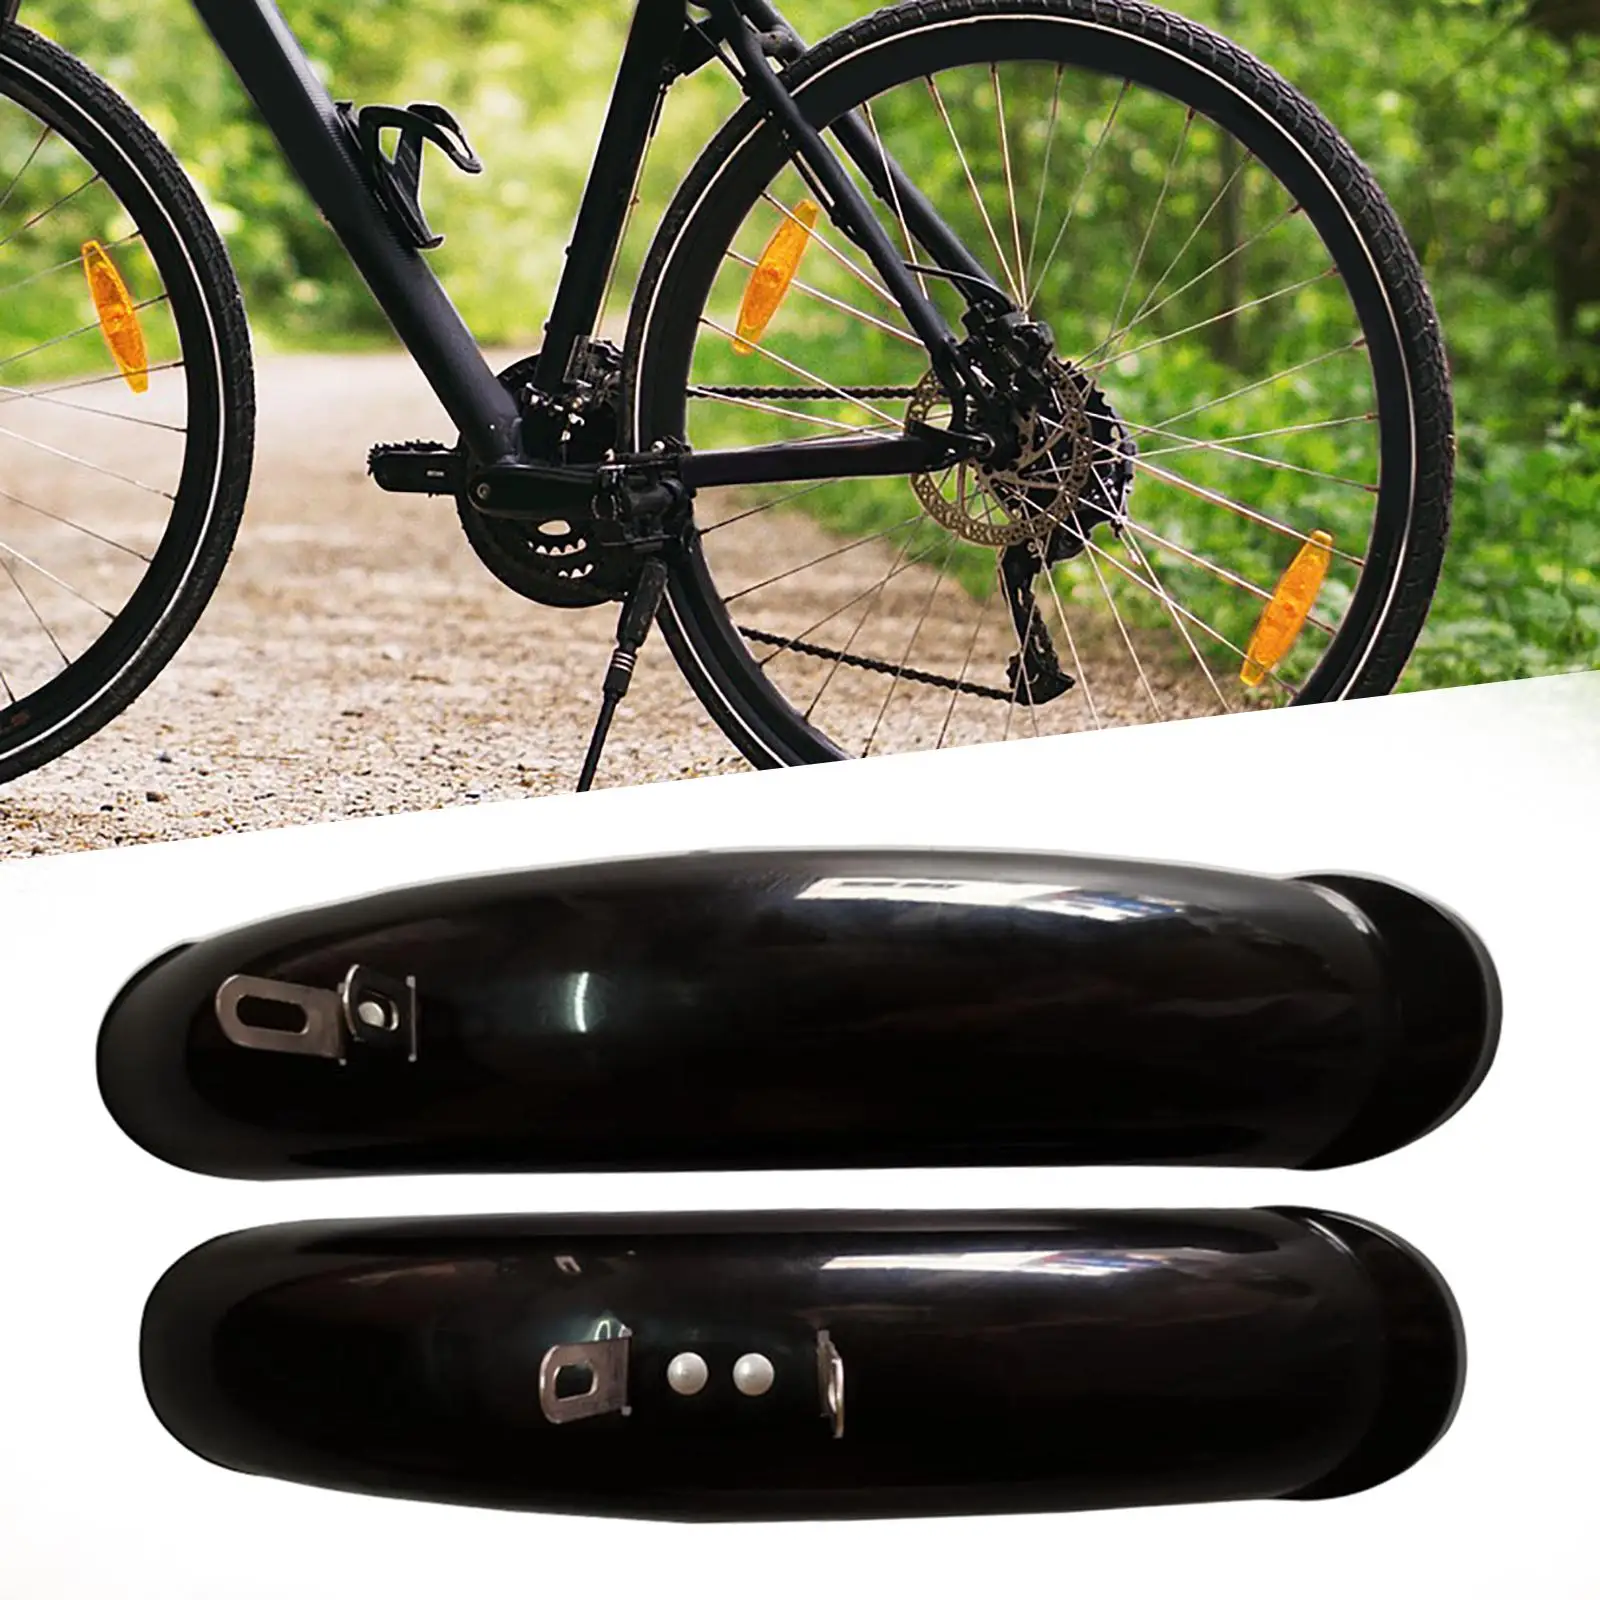 Kids Bike Mudguard Front Rear Set Easy Installation Durable Repair Bicycle Mud Guard Children Bike Fenders for Outdoor Riding